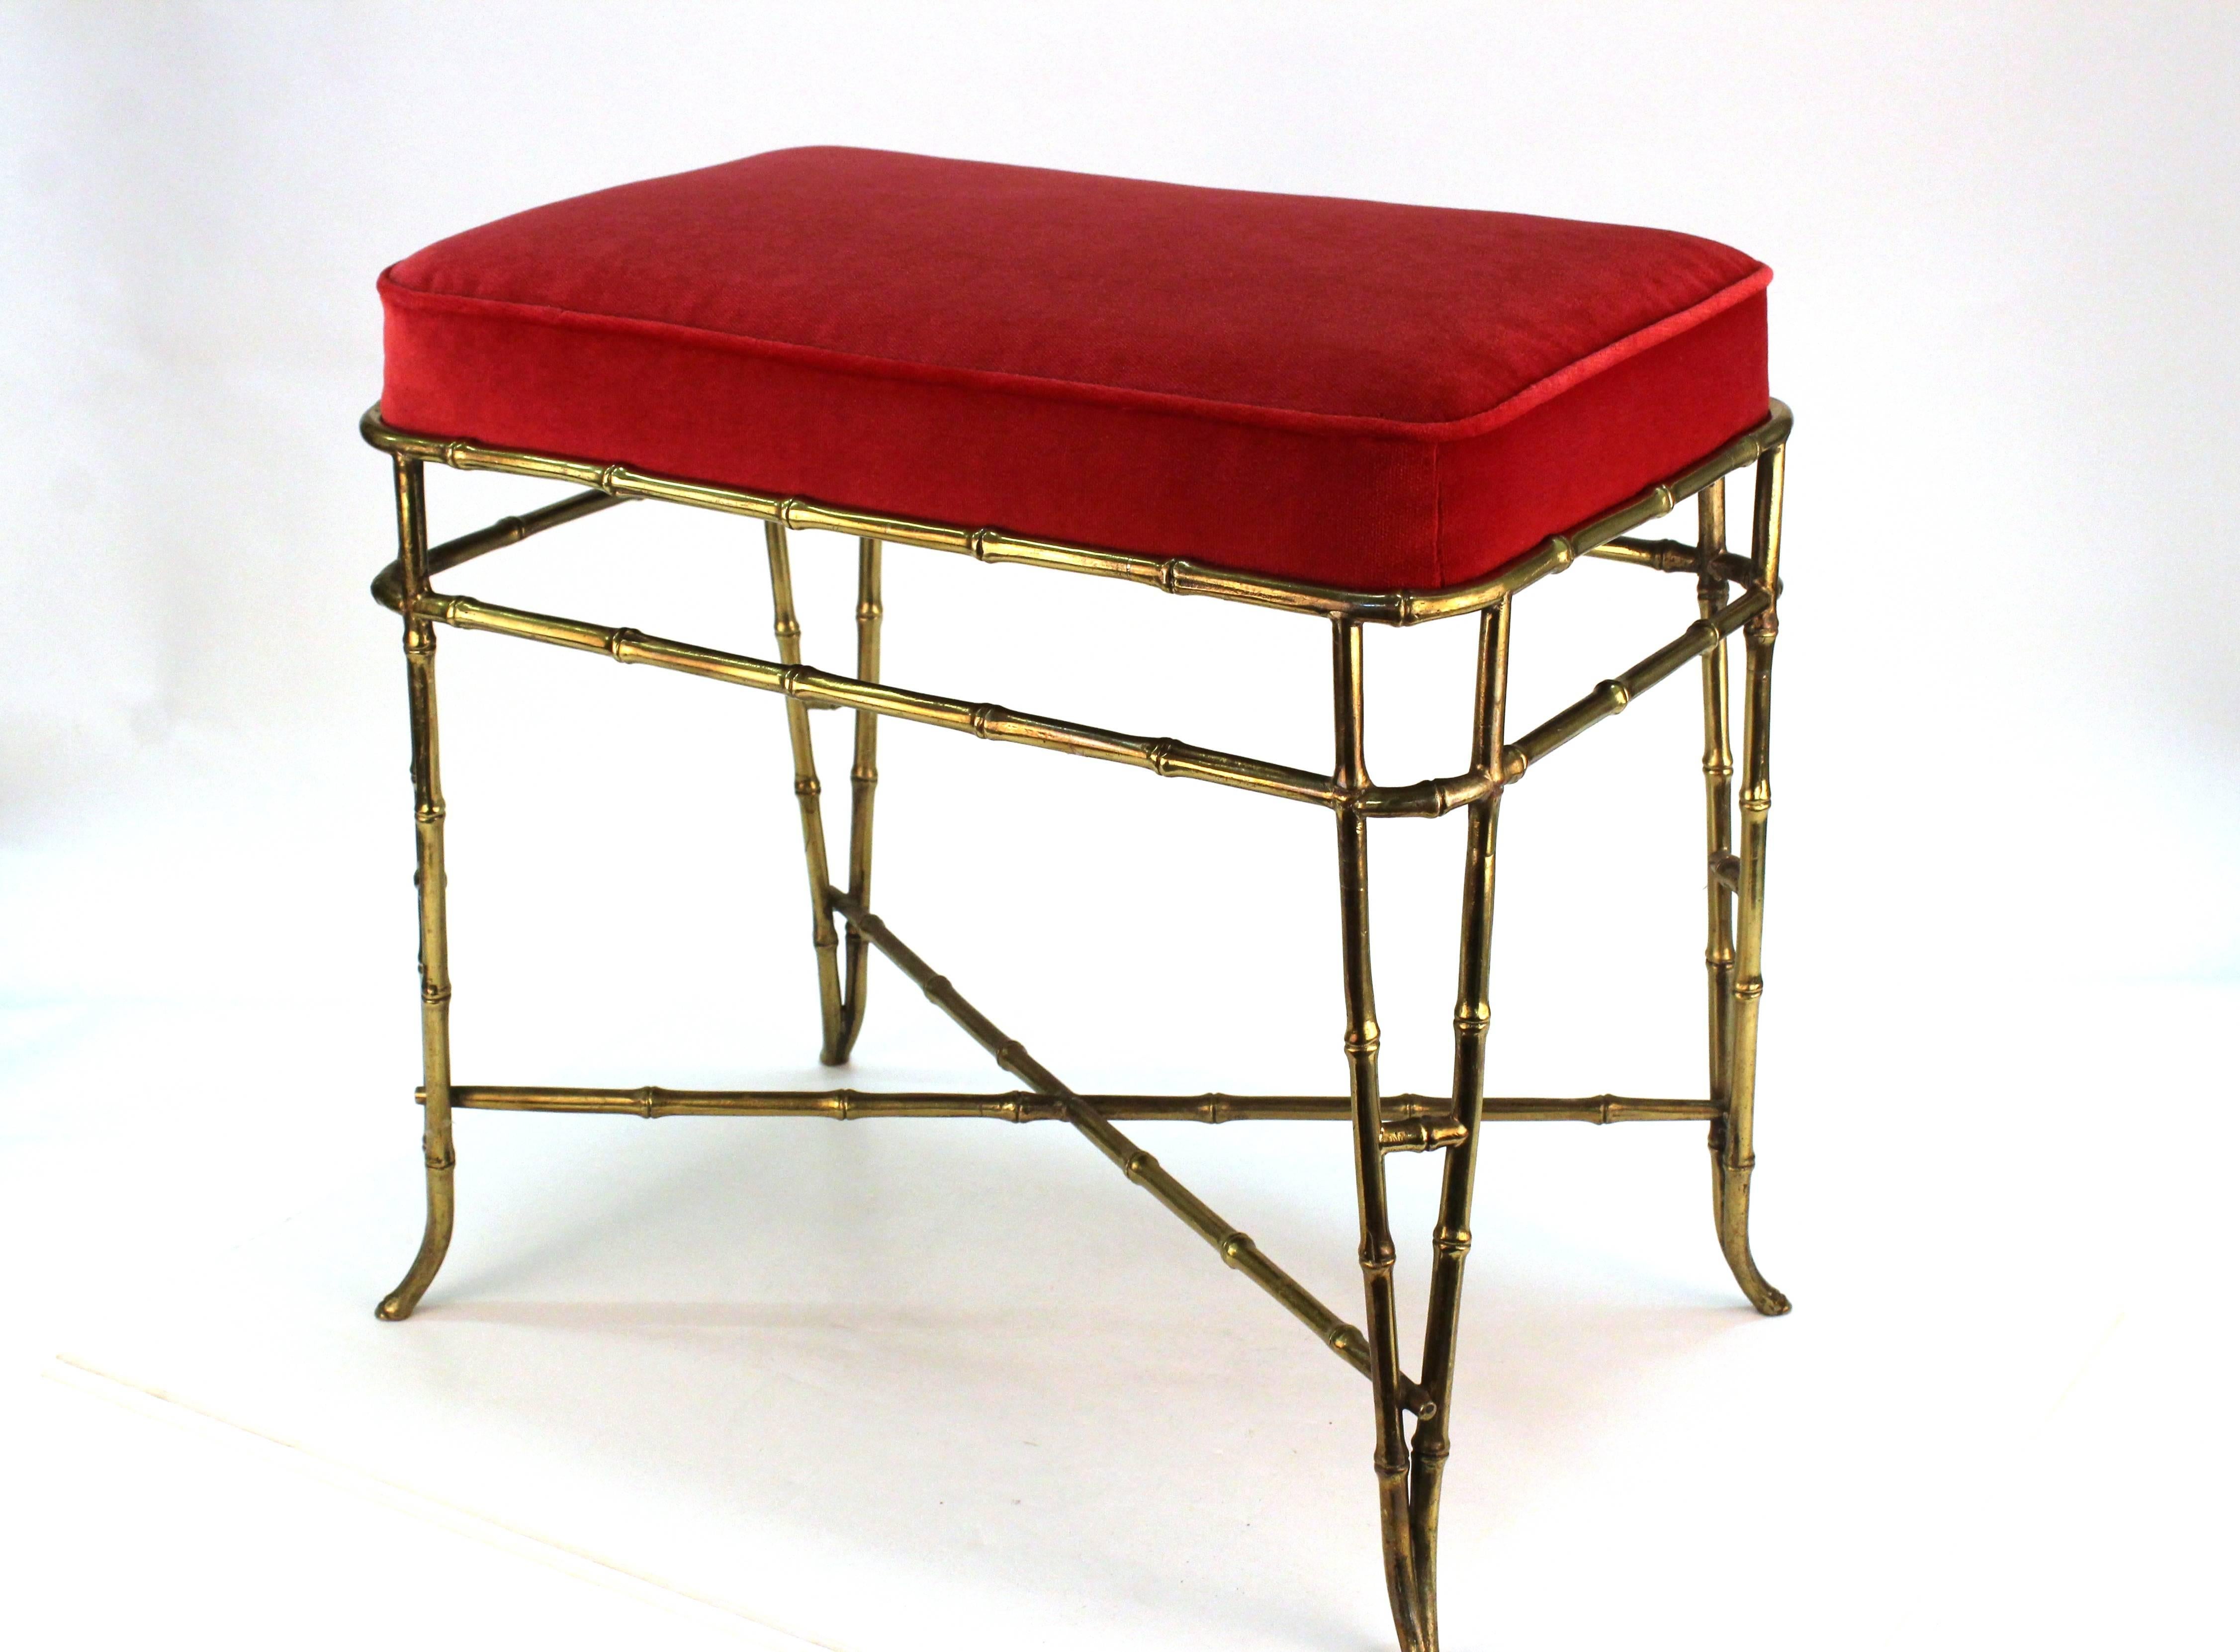 A faux bamboo bench in polished brass. Produced during the 1960s in the Hollywood Regency style. Newly re-upholstered in fuchsia velvet. In excellent condition.